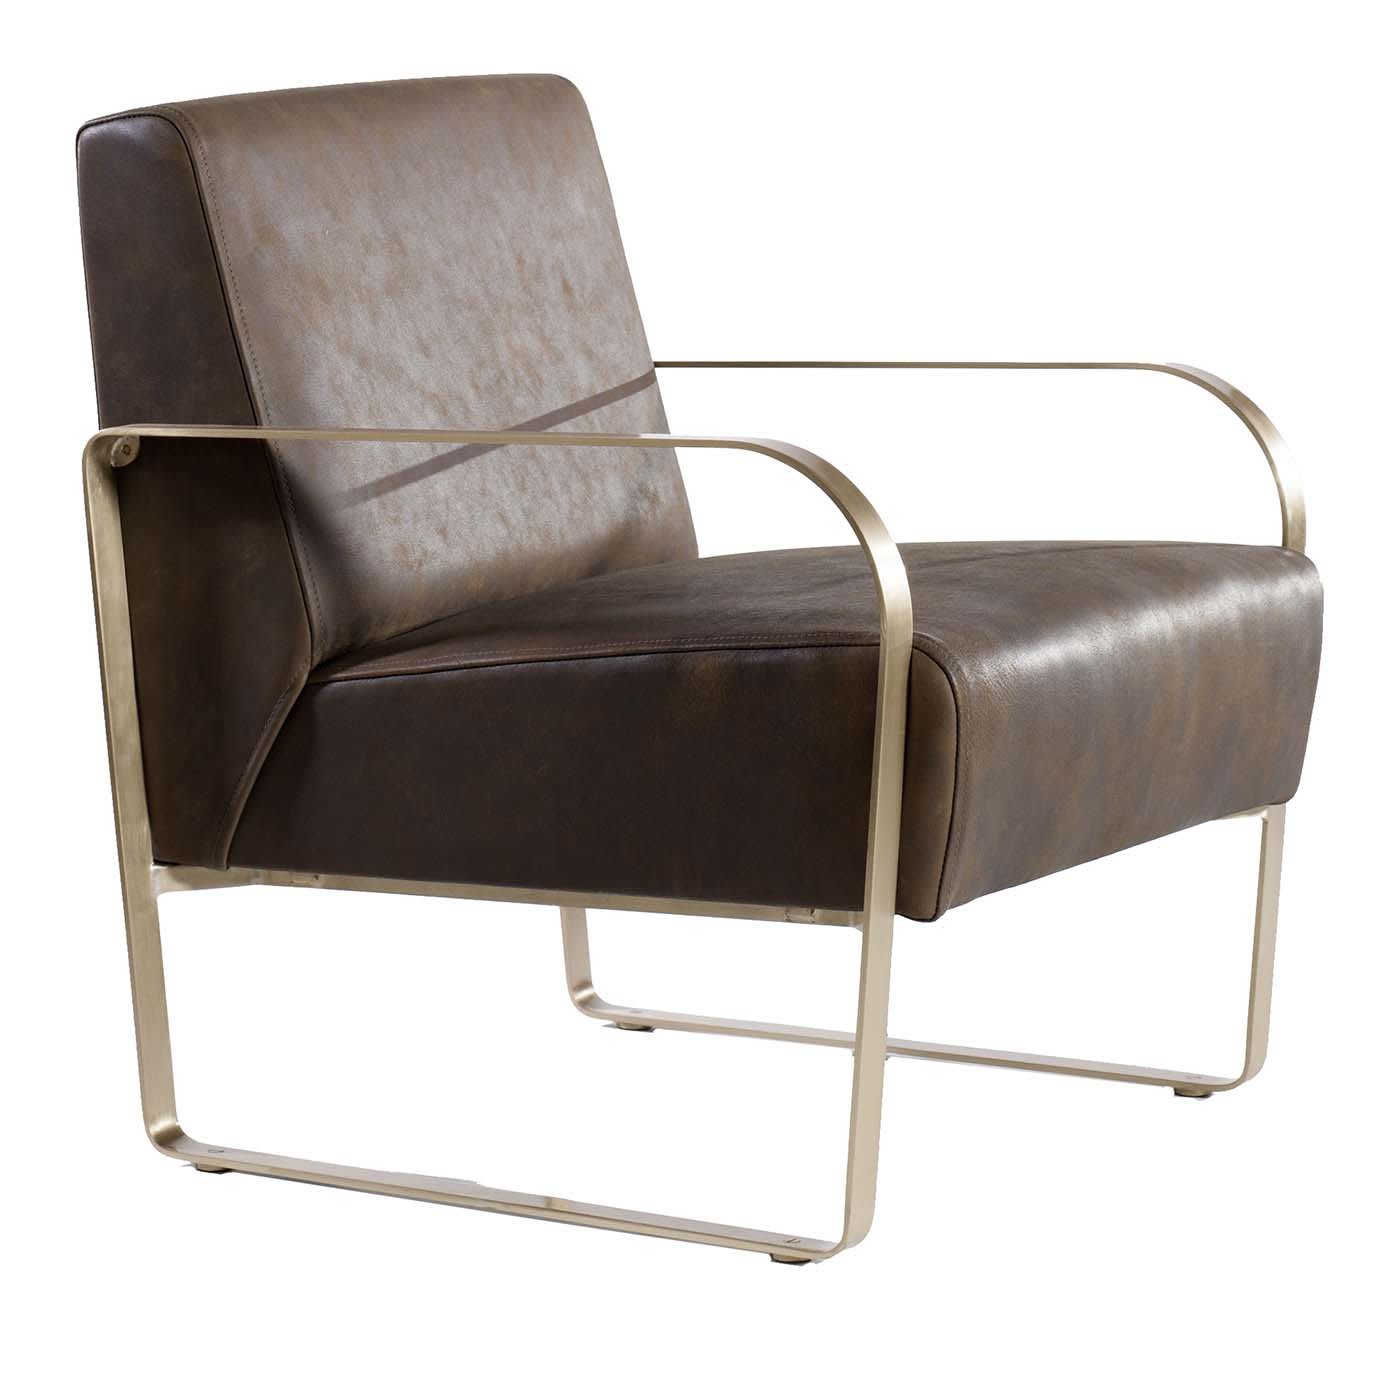 The Leather Armchair - B.B. for Reschio